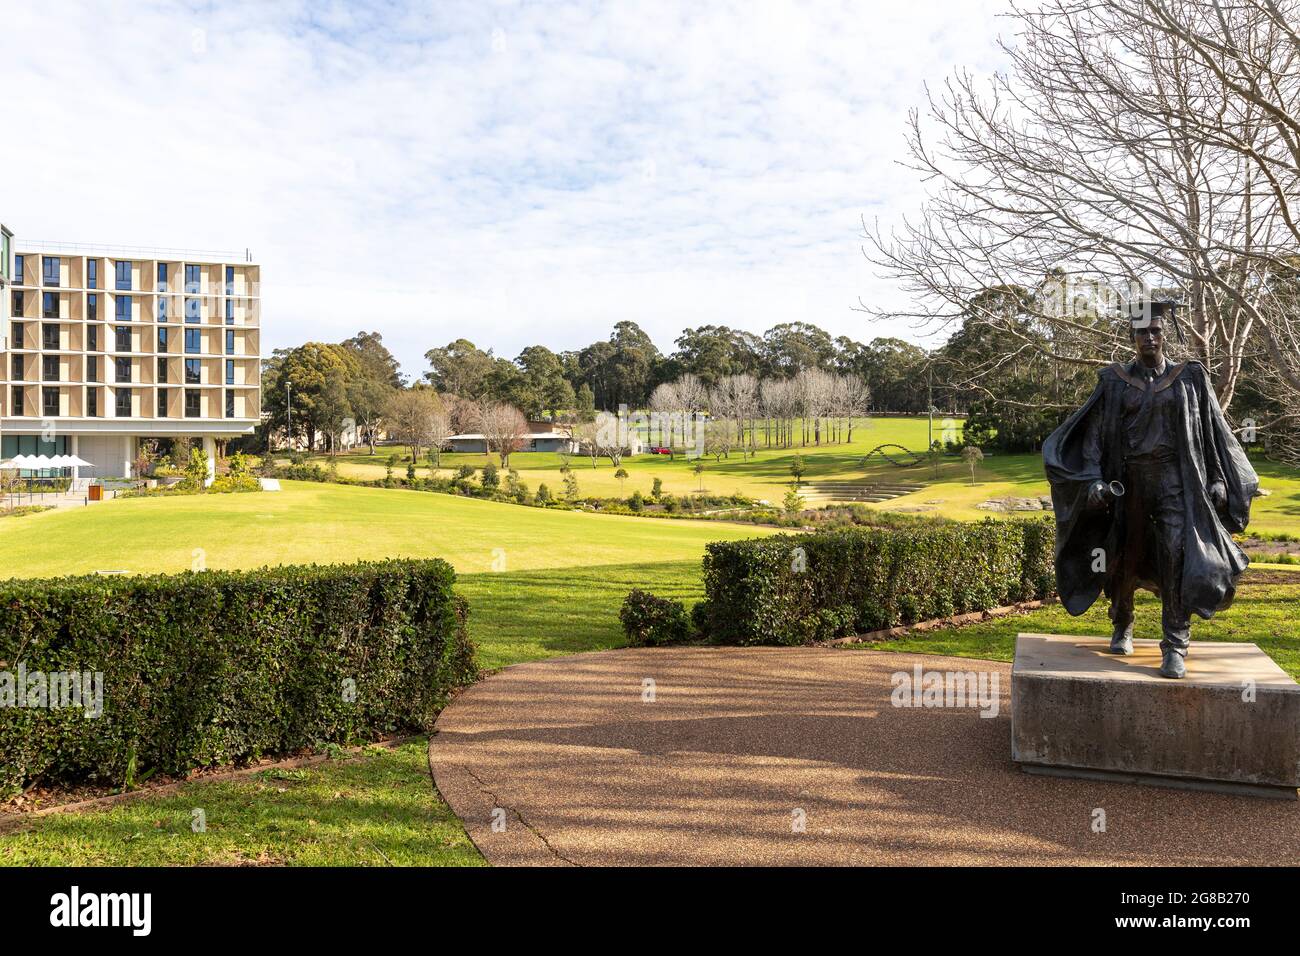 Macquarie University education campus in Macquarie Park with statue of a student wearing cape and mortar board hat,Sydney,Australia Stock Photo